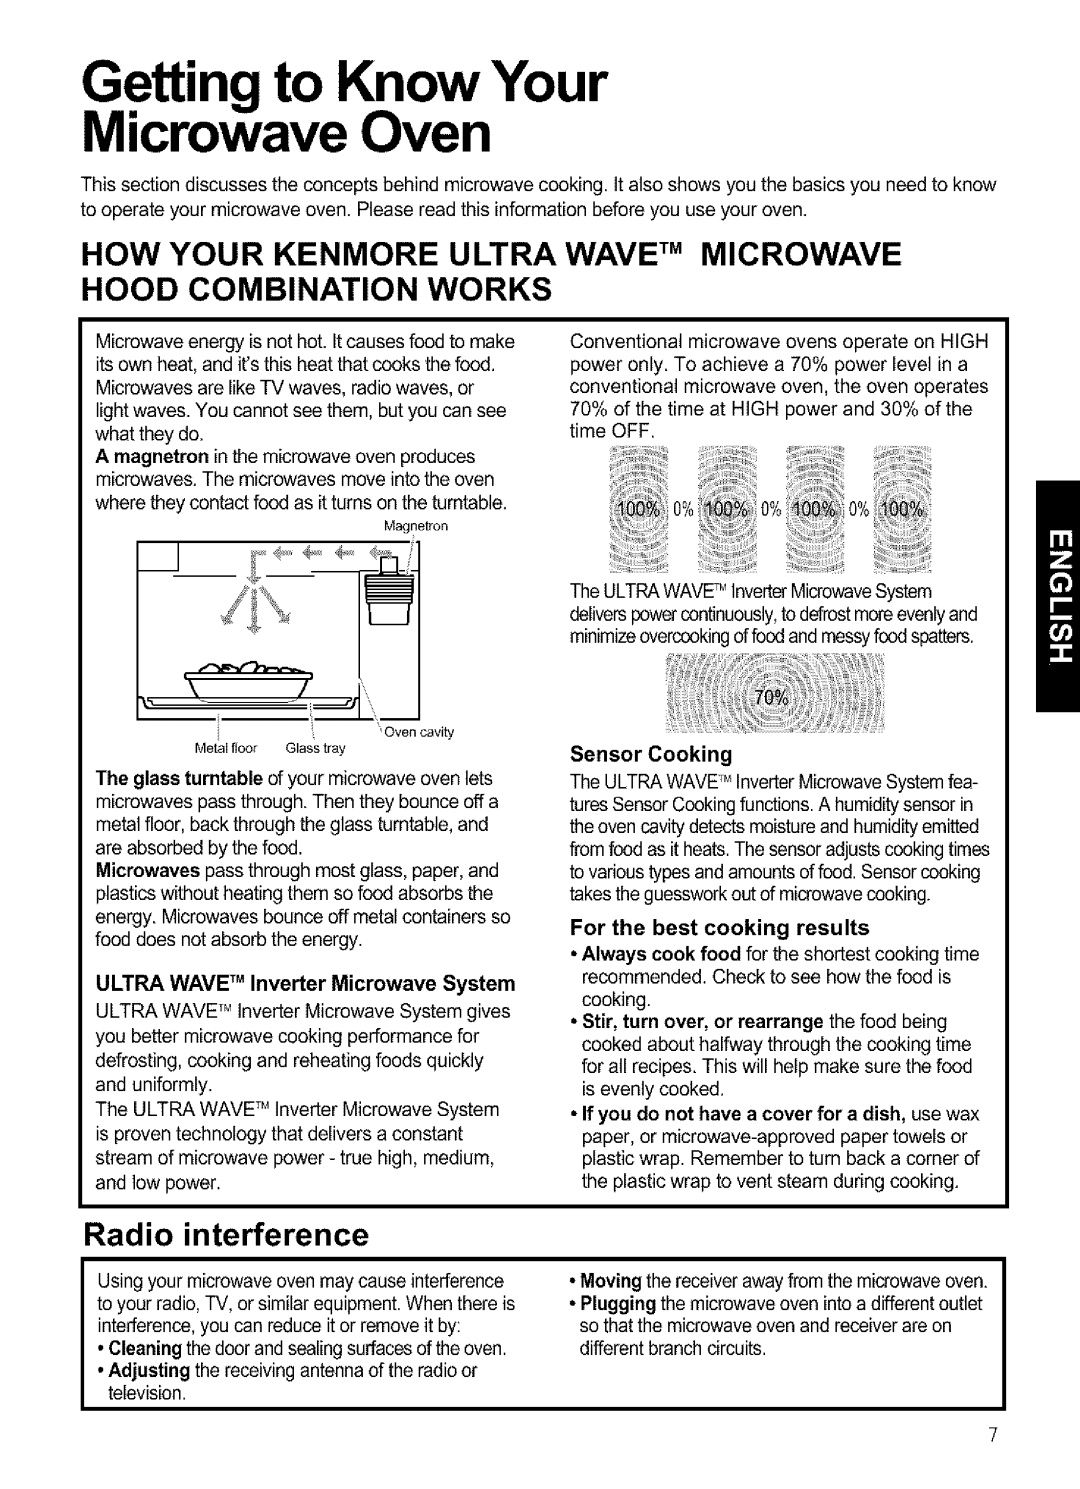 Kenmore 721.64683 Getting to Know Your Microwave Oven, How Your Kenmore Ultra Hood Combination Works, Wave Tm Microwave 